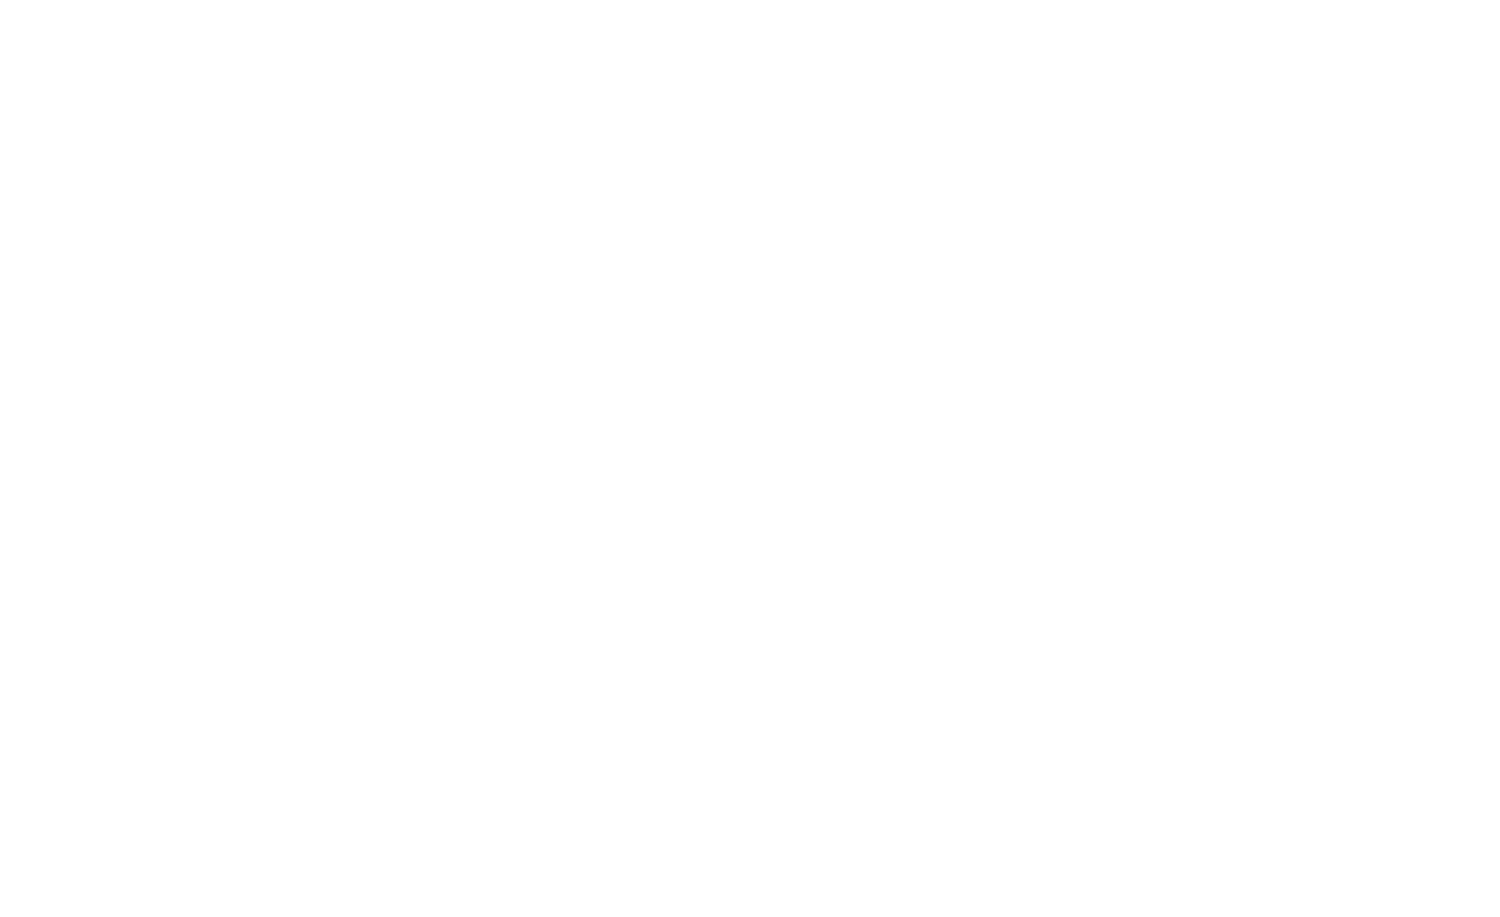 Michelle Lee Imagery